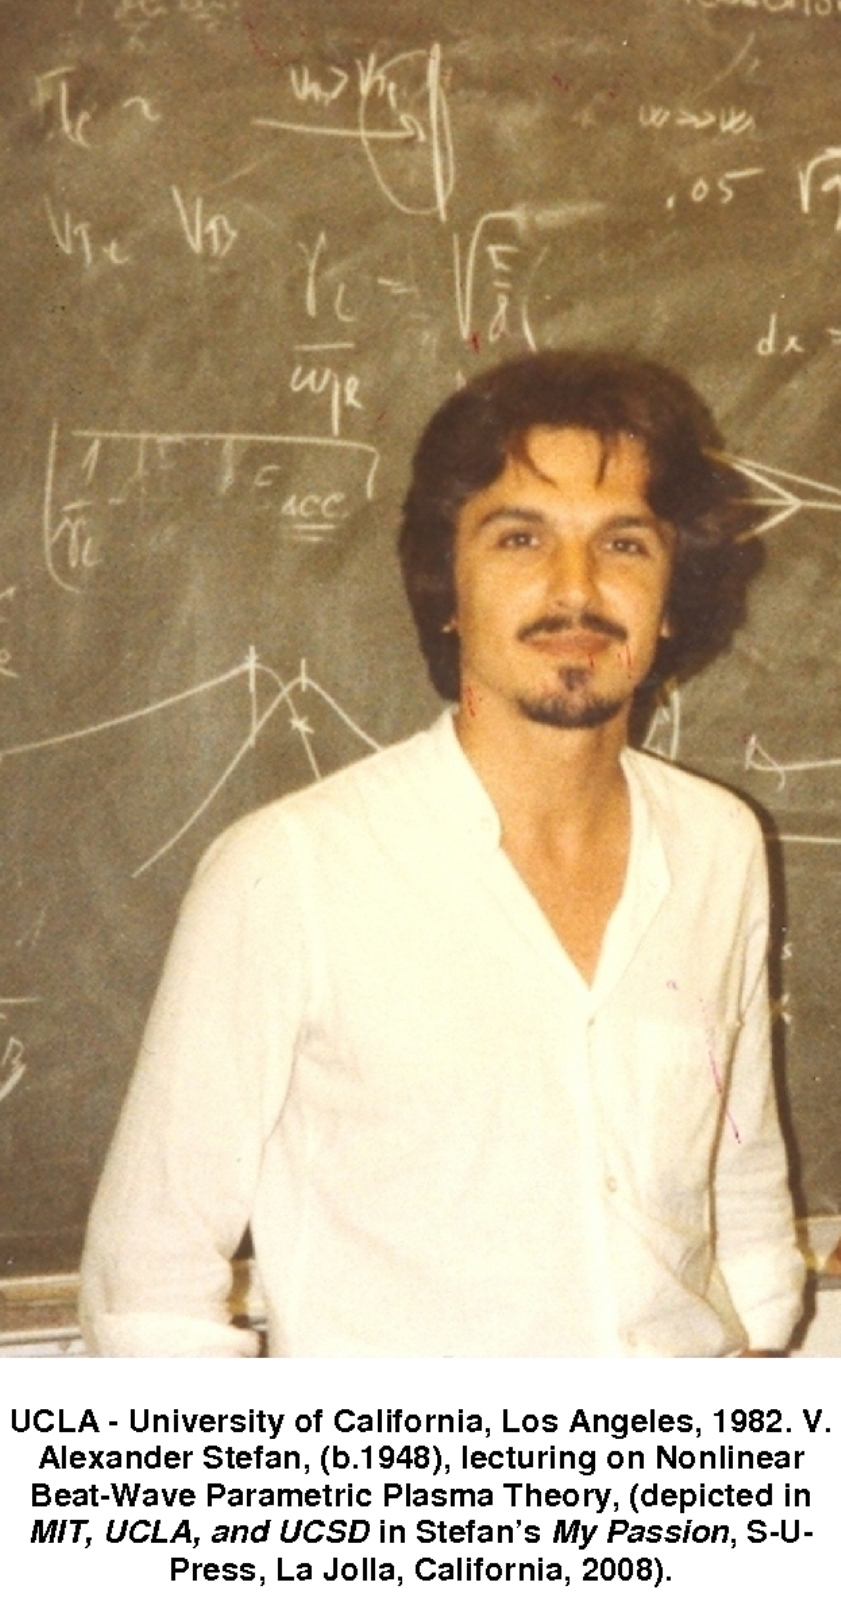 UCLA - University of California, Los Angeles, 1982. V. Alexander Stefan, (b.1948), lecturing on Nonlinear Beat-Wave Parametric Plasma Theory, (depicted in MIT, UCLA, and UCSD in Stefans My Passion, S-U-Press, La Jolla, California, 2008).